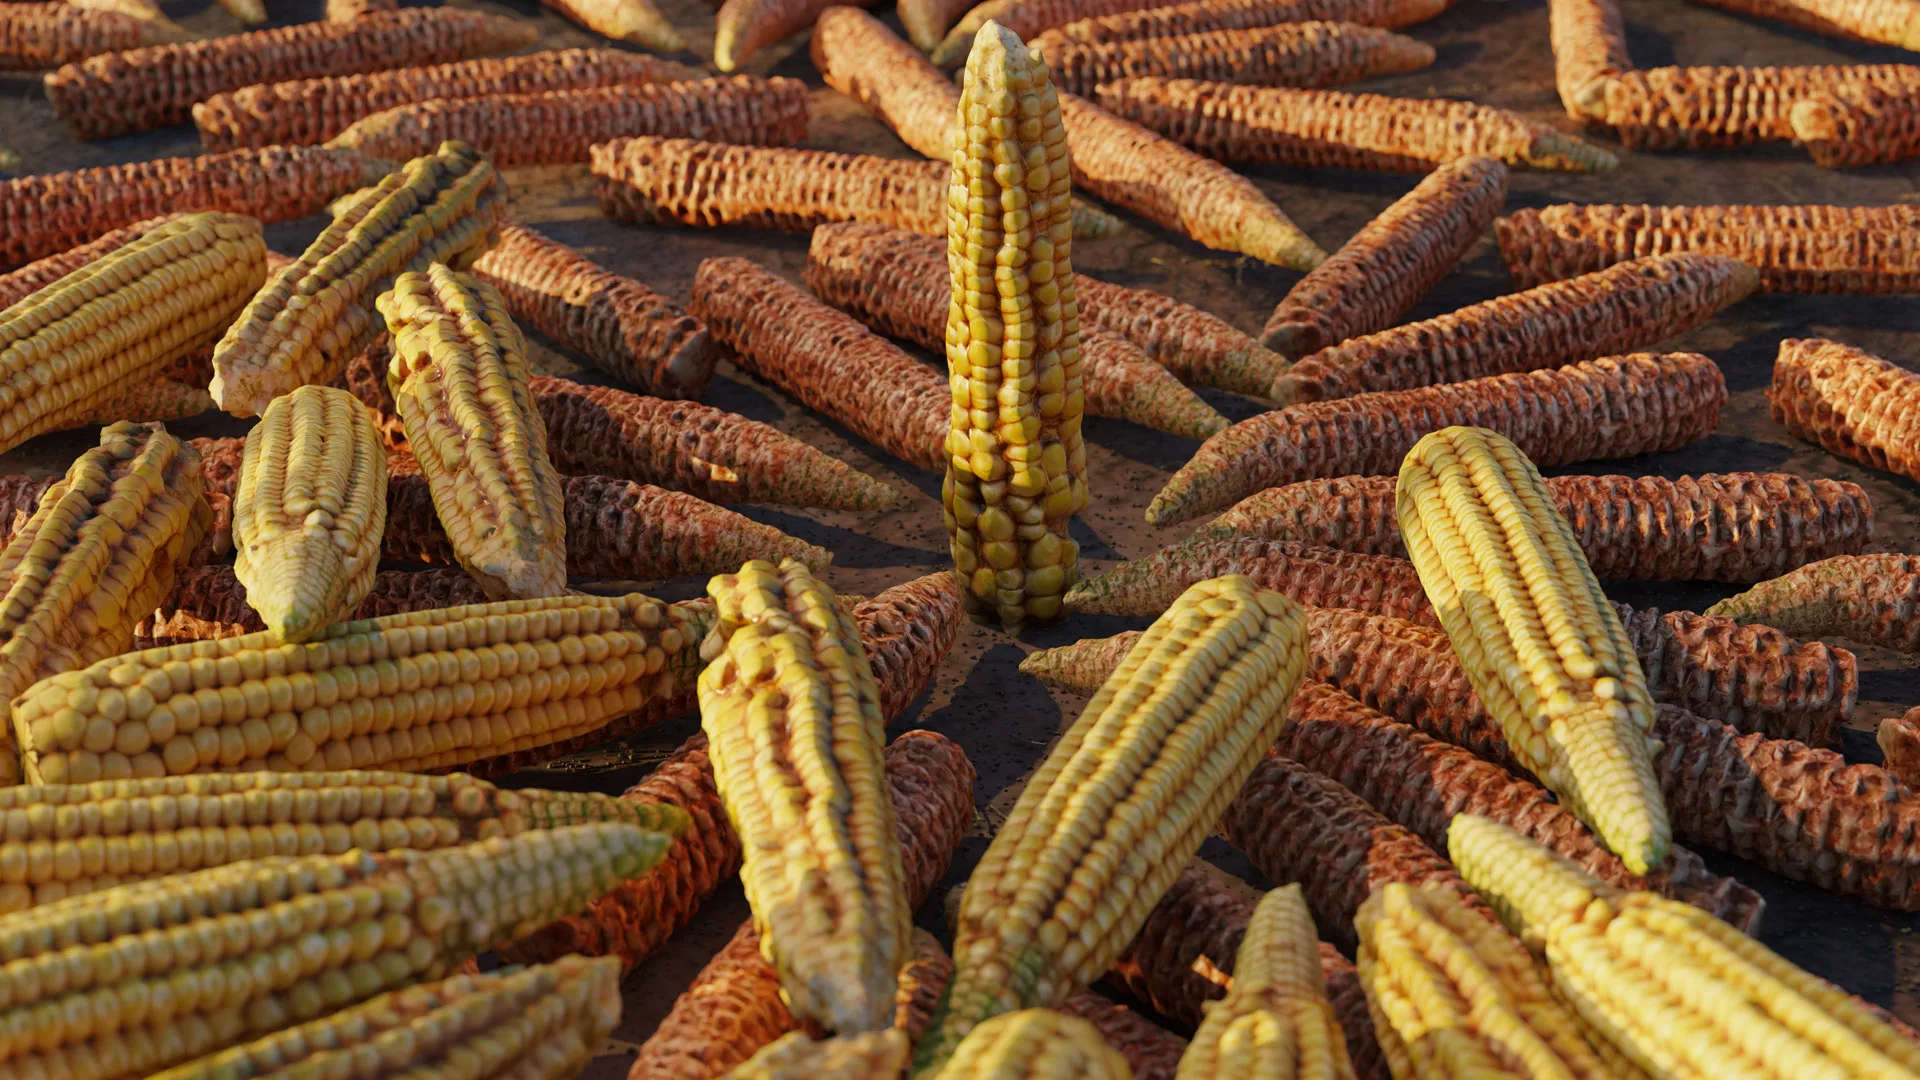 Corn Cob Of 3 Types In Different Stages